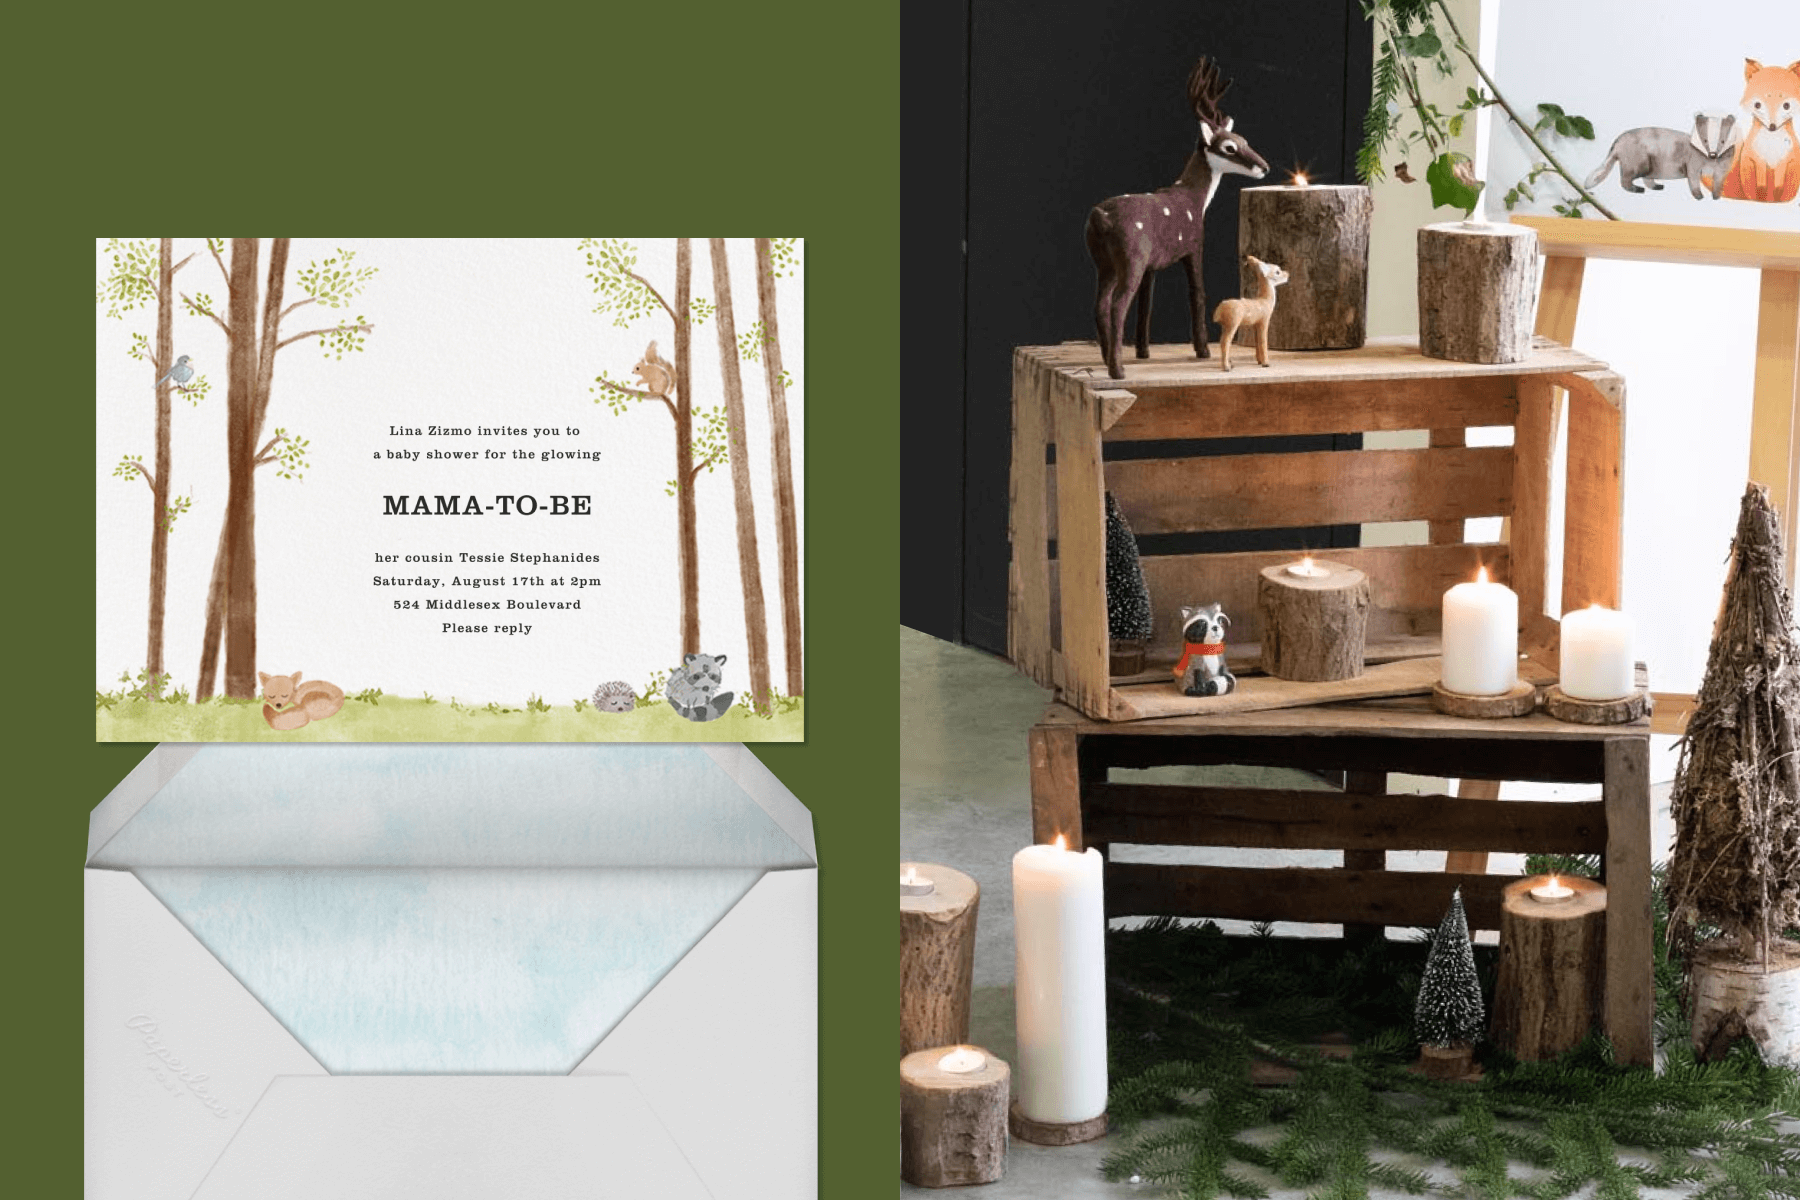 left: A baby shower invitation with trees and baby animals. Right: A collection of pillar candles and miniature forest animals on rustic wood crates.